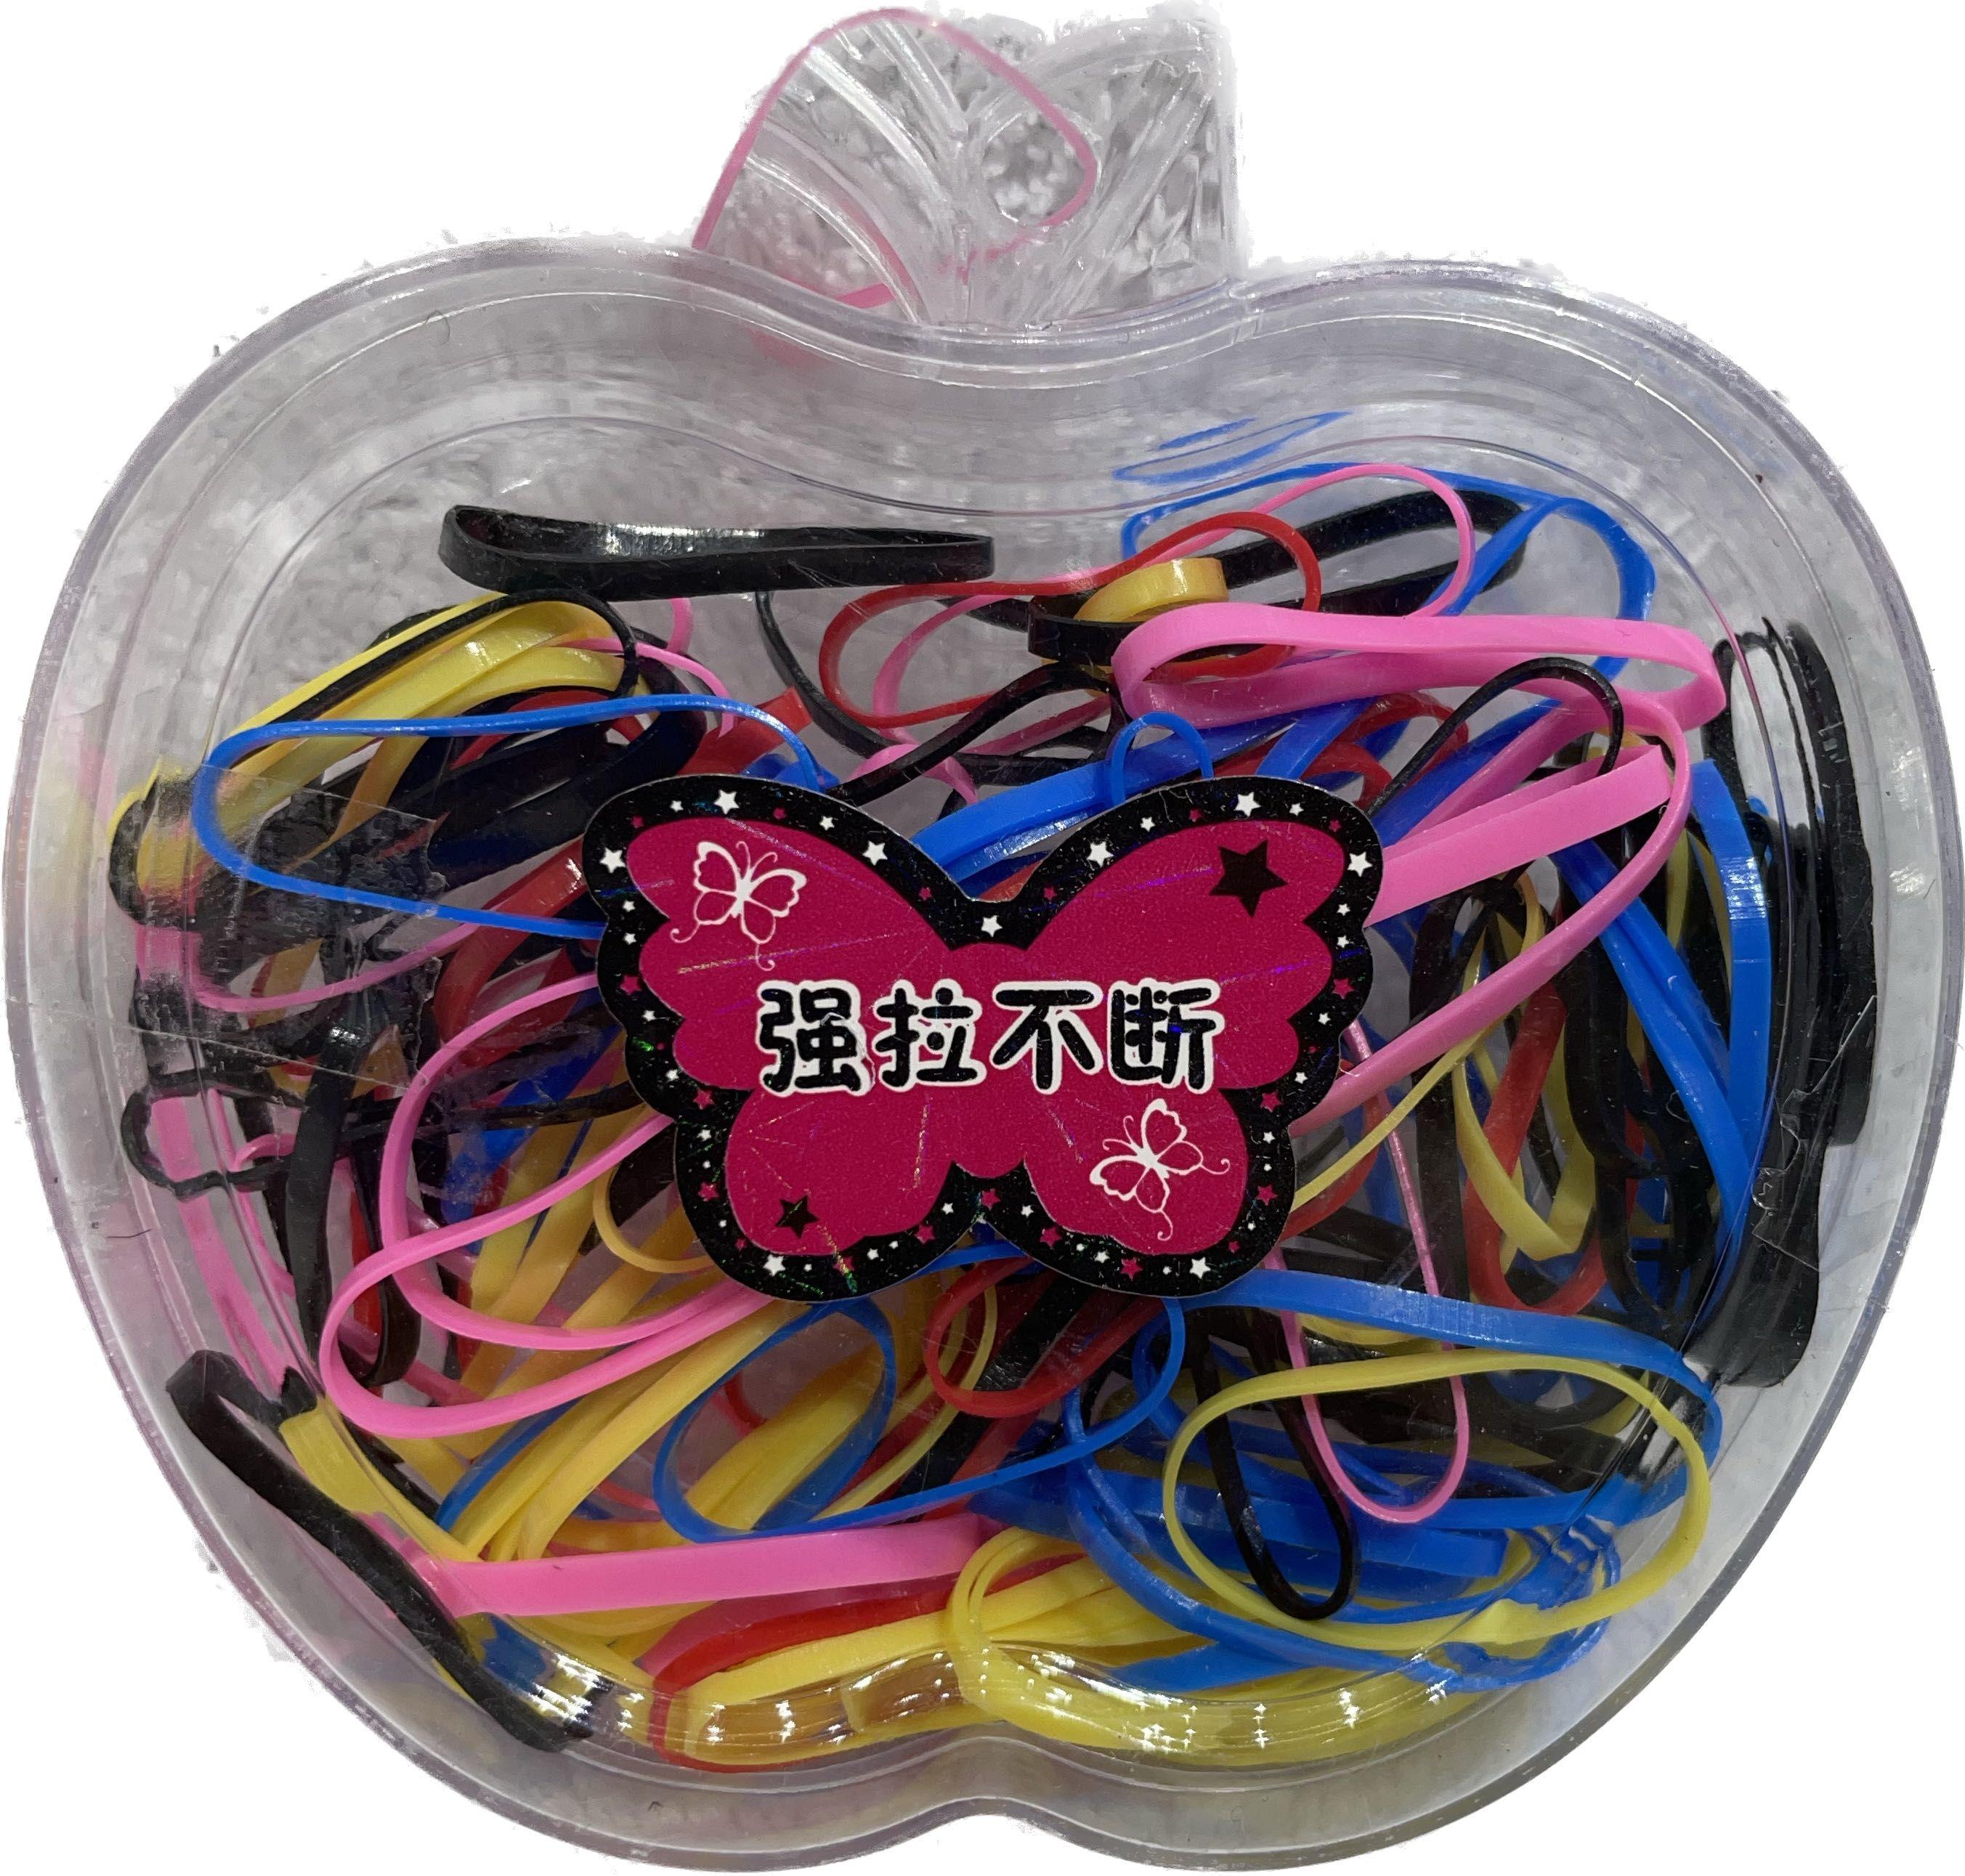 A set of rubber bands for hair recipes, mix of colors - type 1